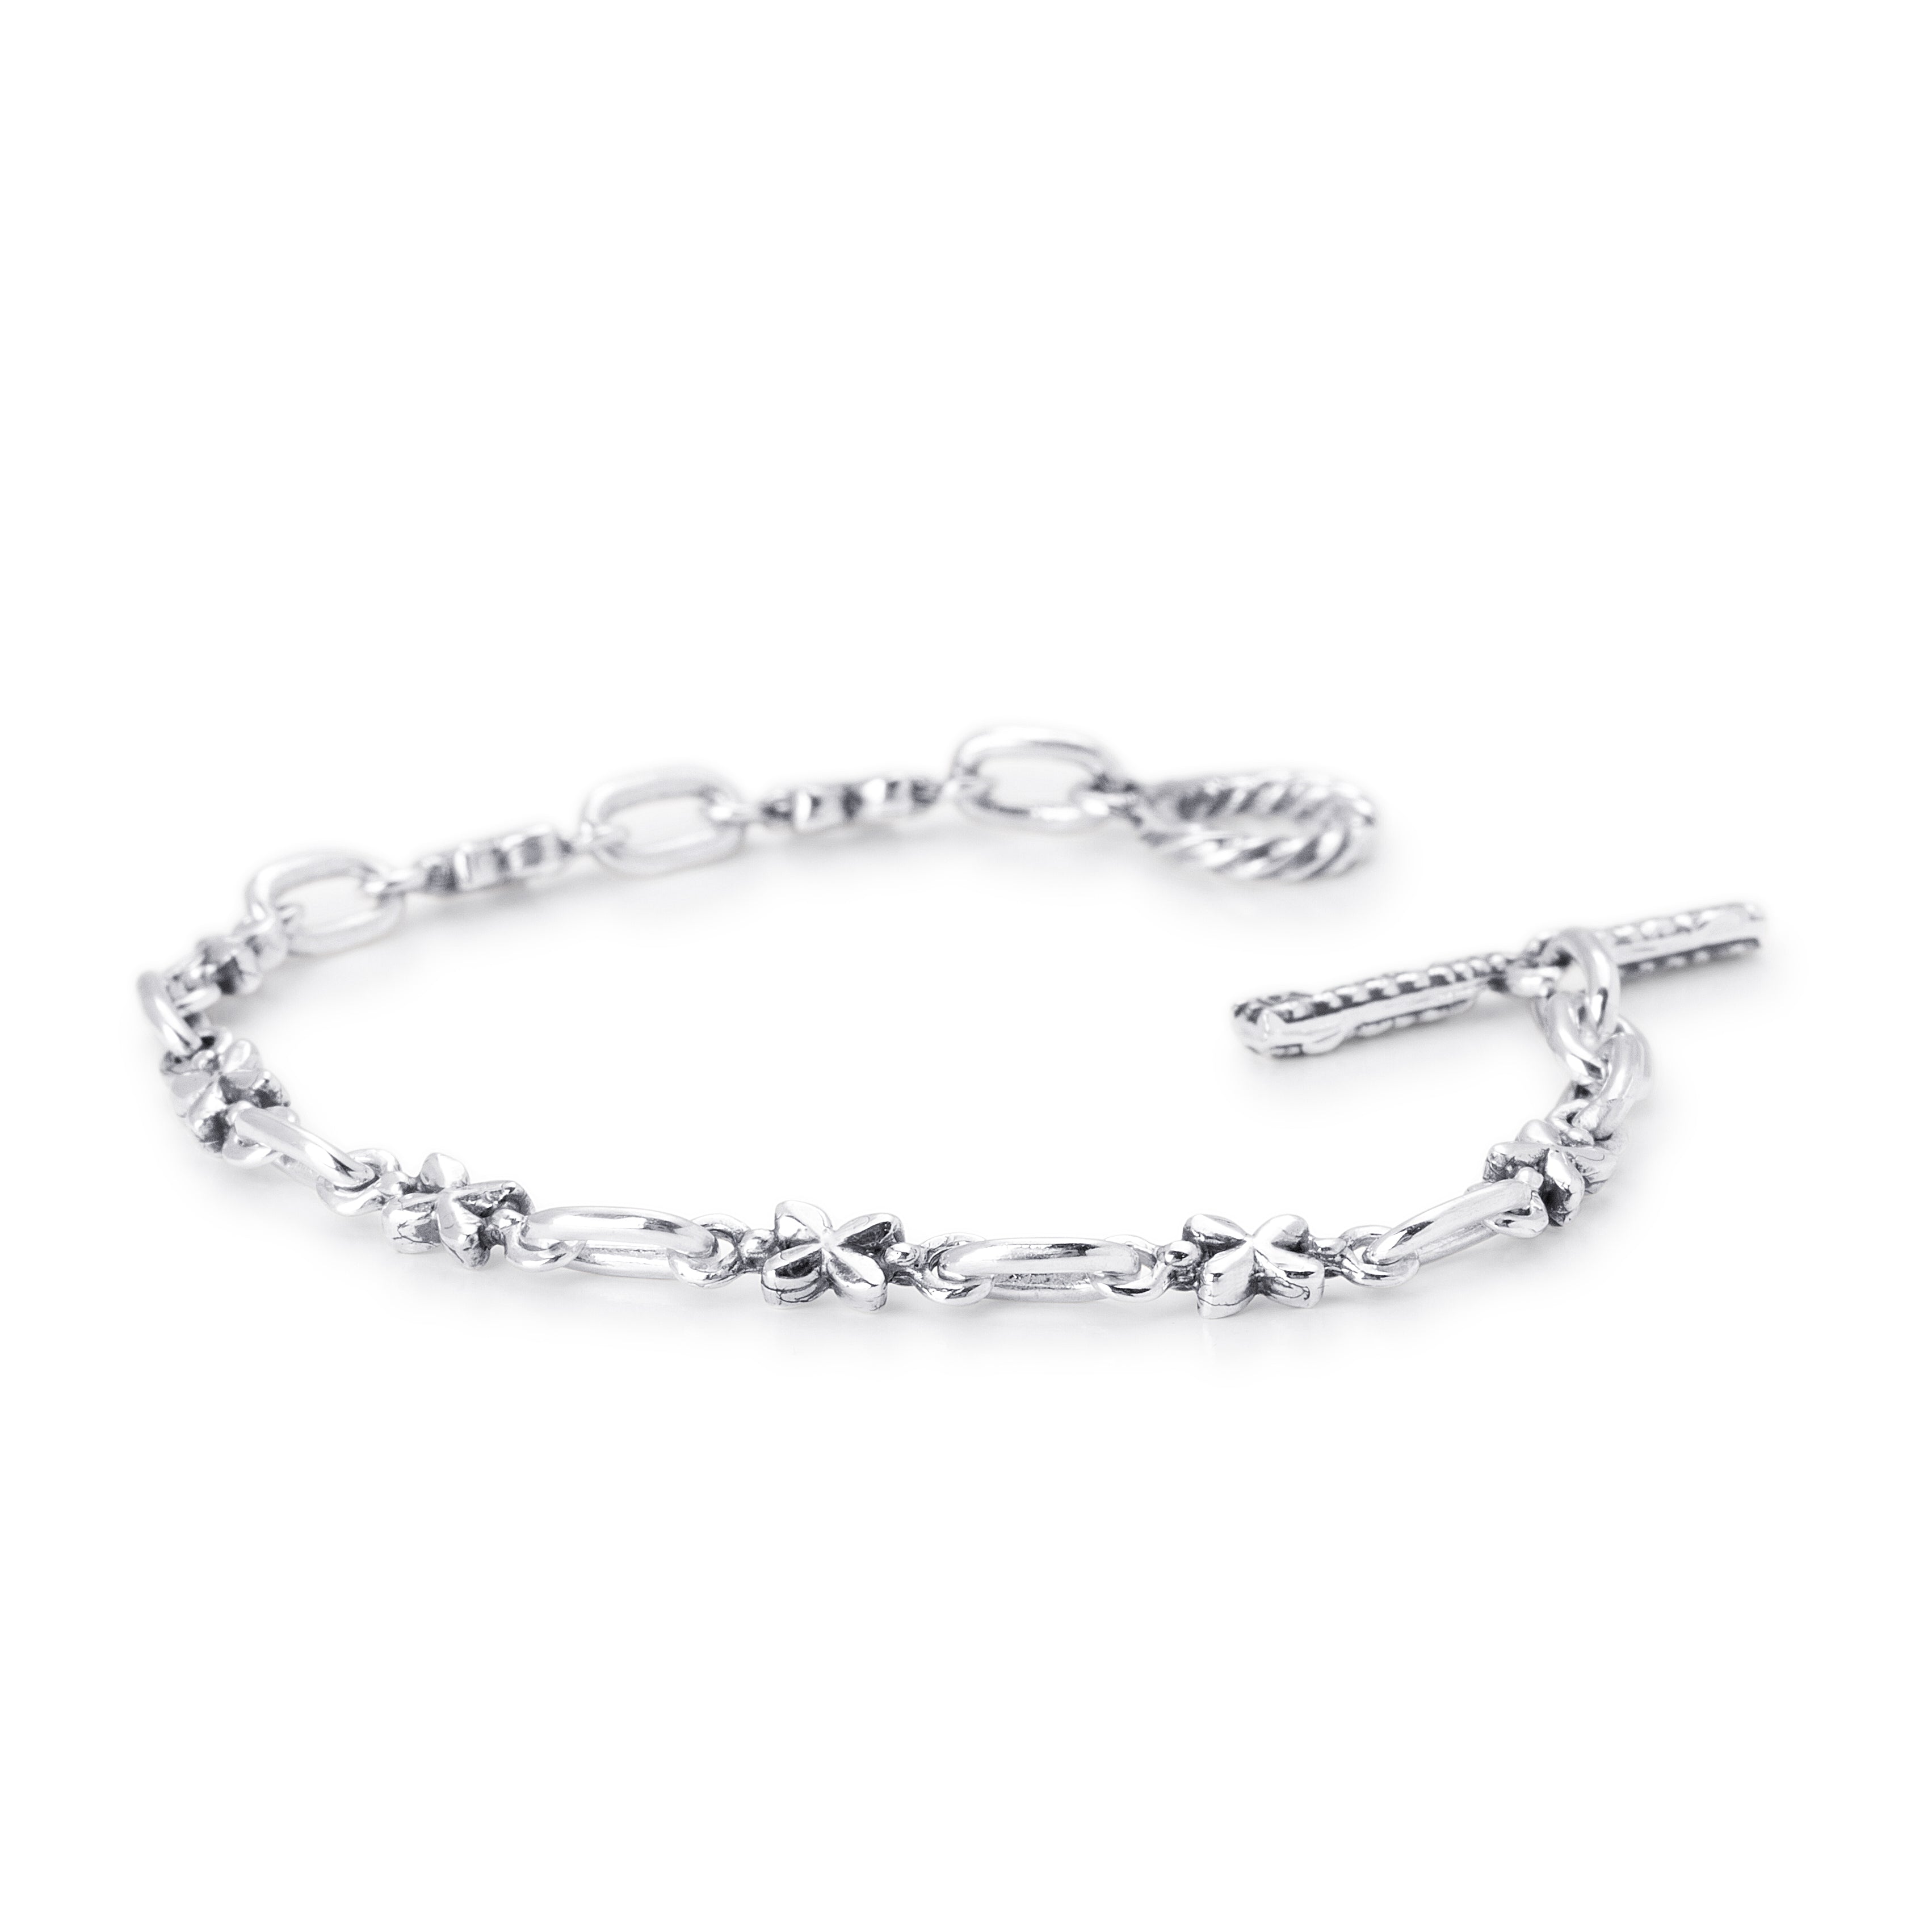 Small Floral Link Chain Bracelet in Sterling Silver, 3.5mm